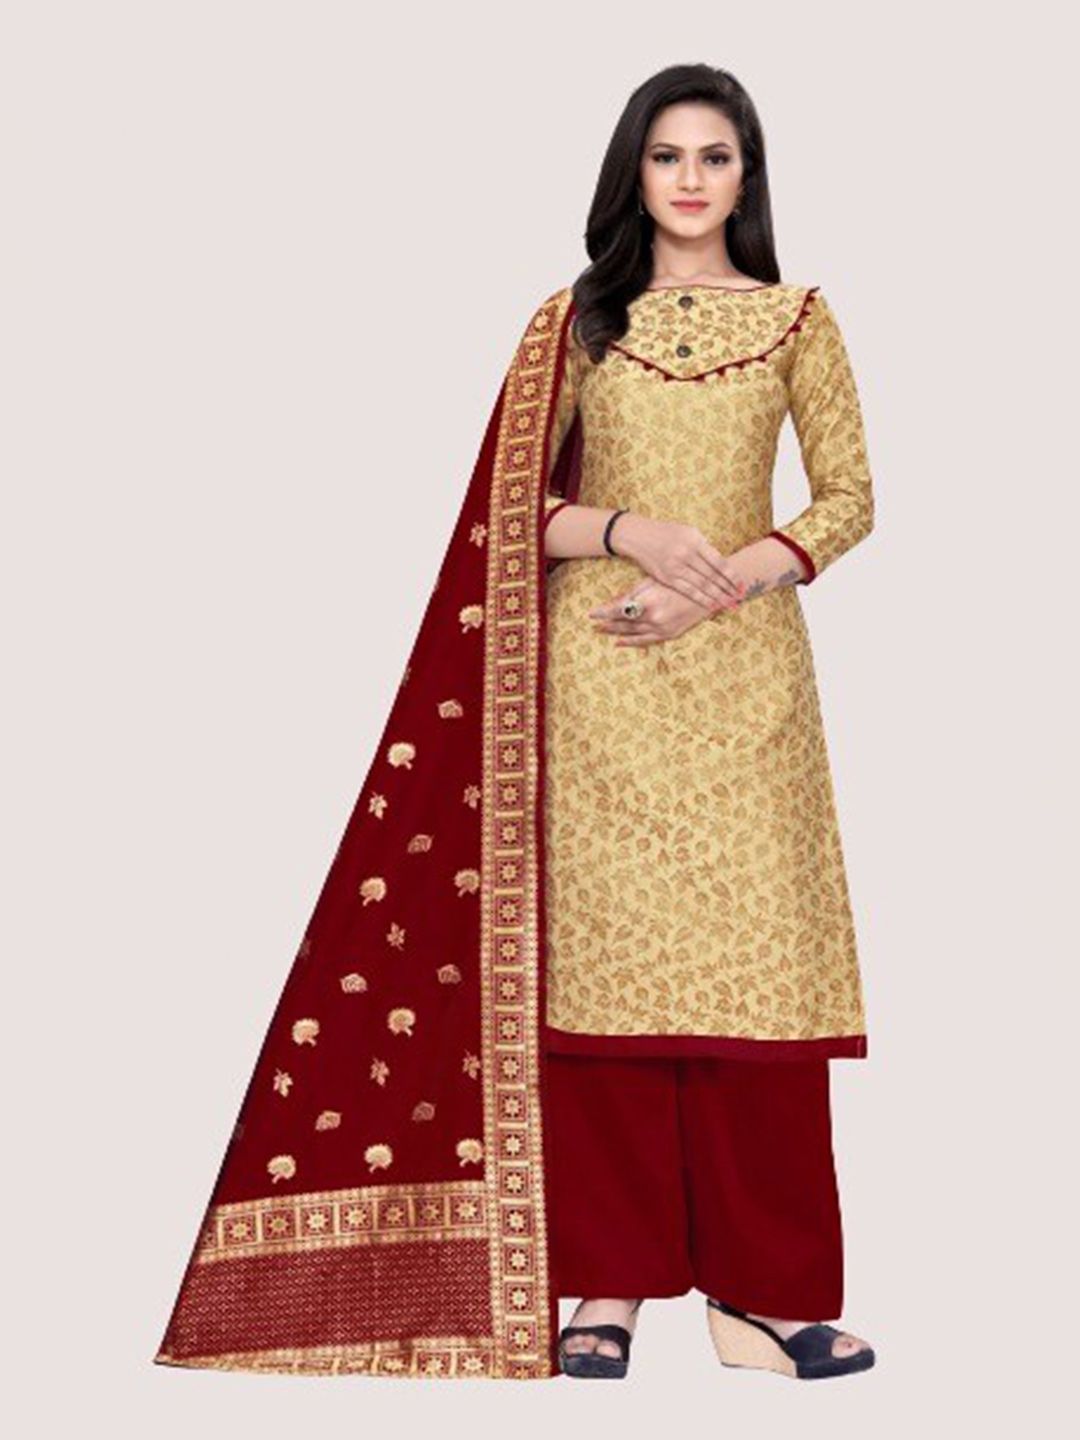 MORLY Beige & Maroon Dupion Silk Unstitched Dress Material Price in India